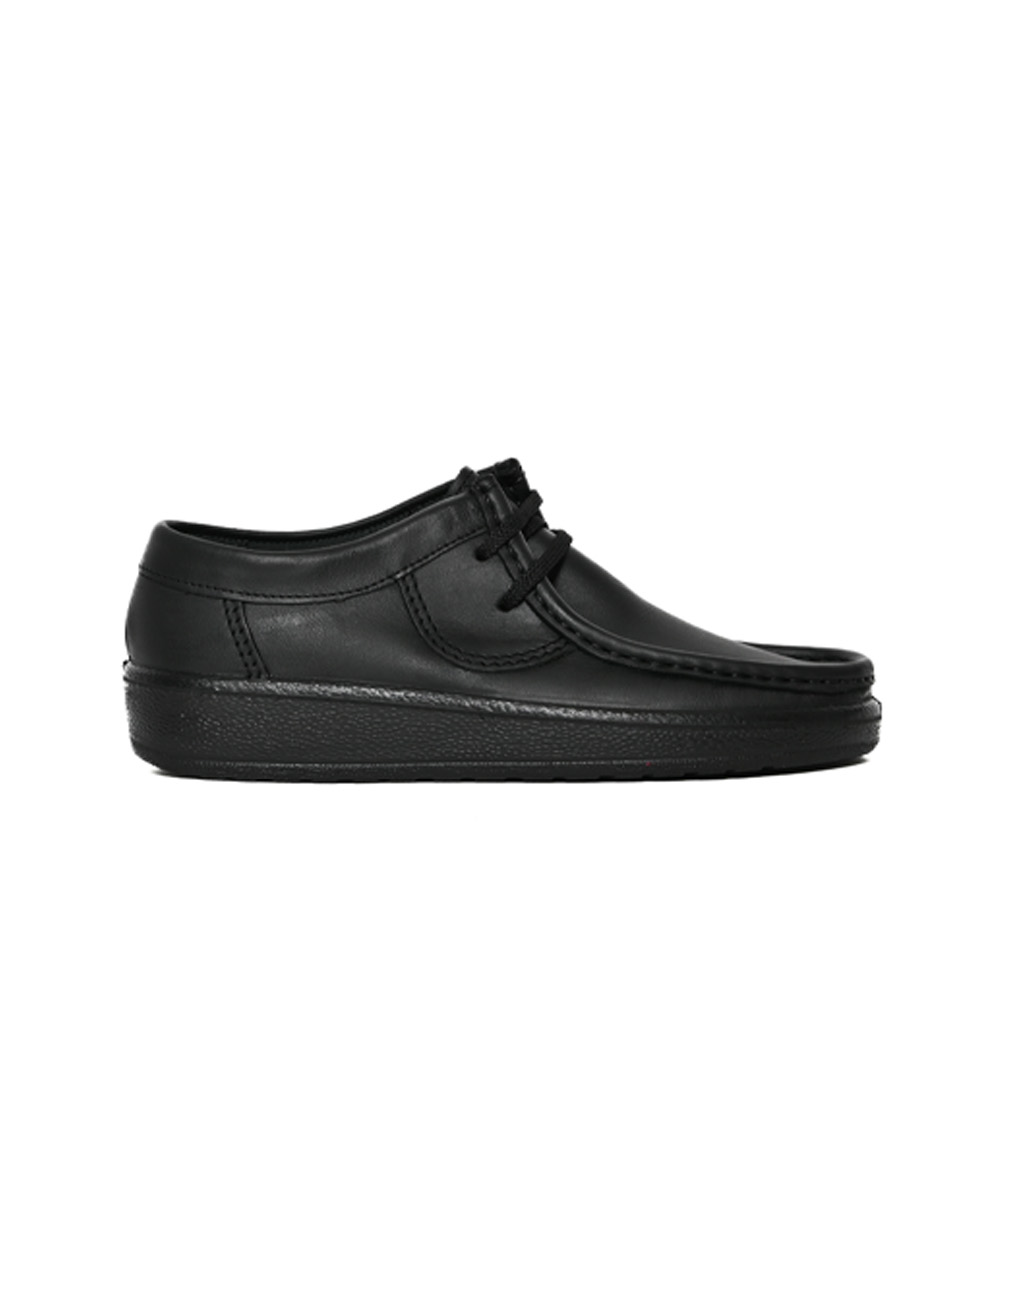 Mens Grasshoppers, Hornsby, Casual Black Moccasins – Bolton Shoes